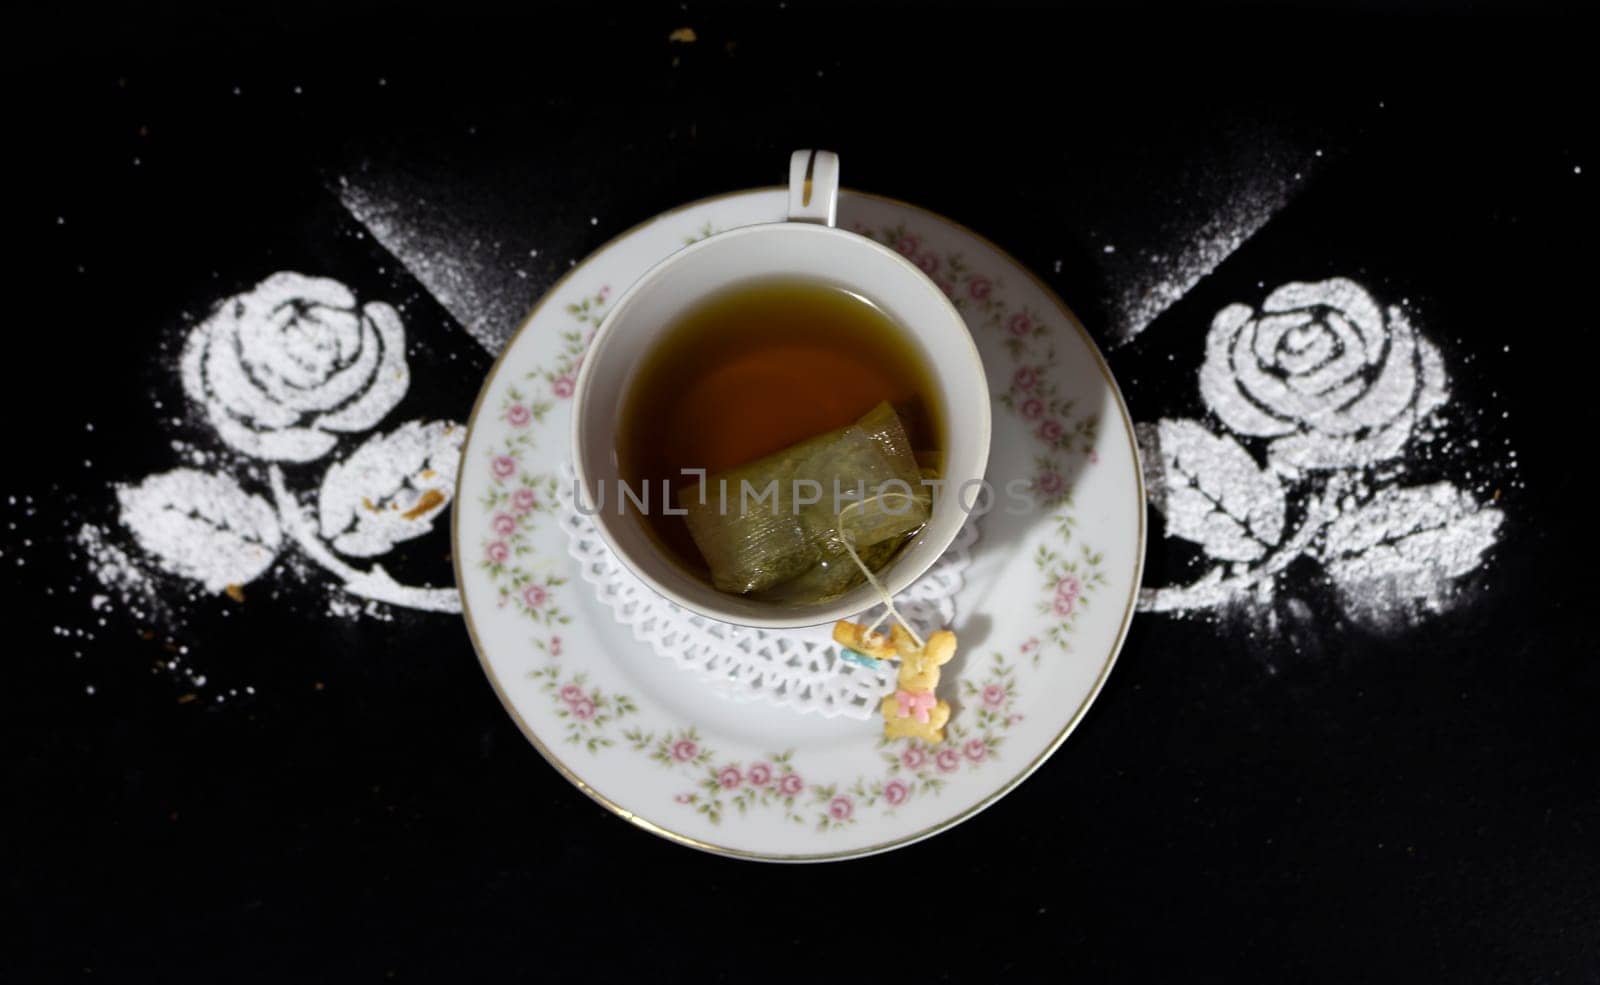 Antique porcelain tea cup seen from above with flowers, the tea bag inside and a small doll of candy growing, decorated with two powdered sugar flowers by Raulmartin